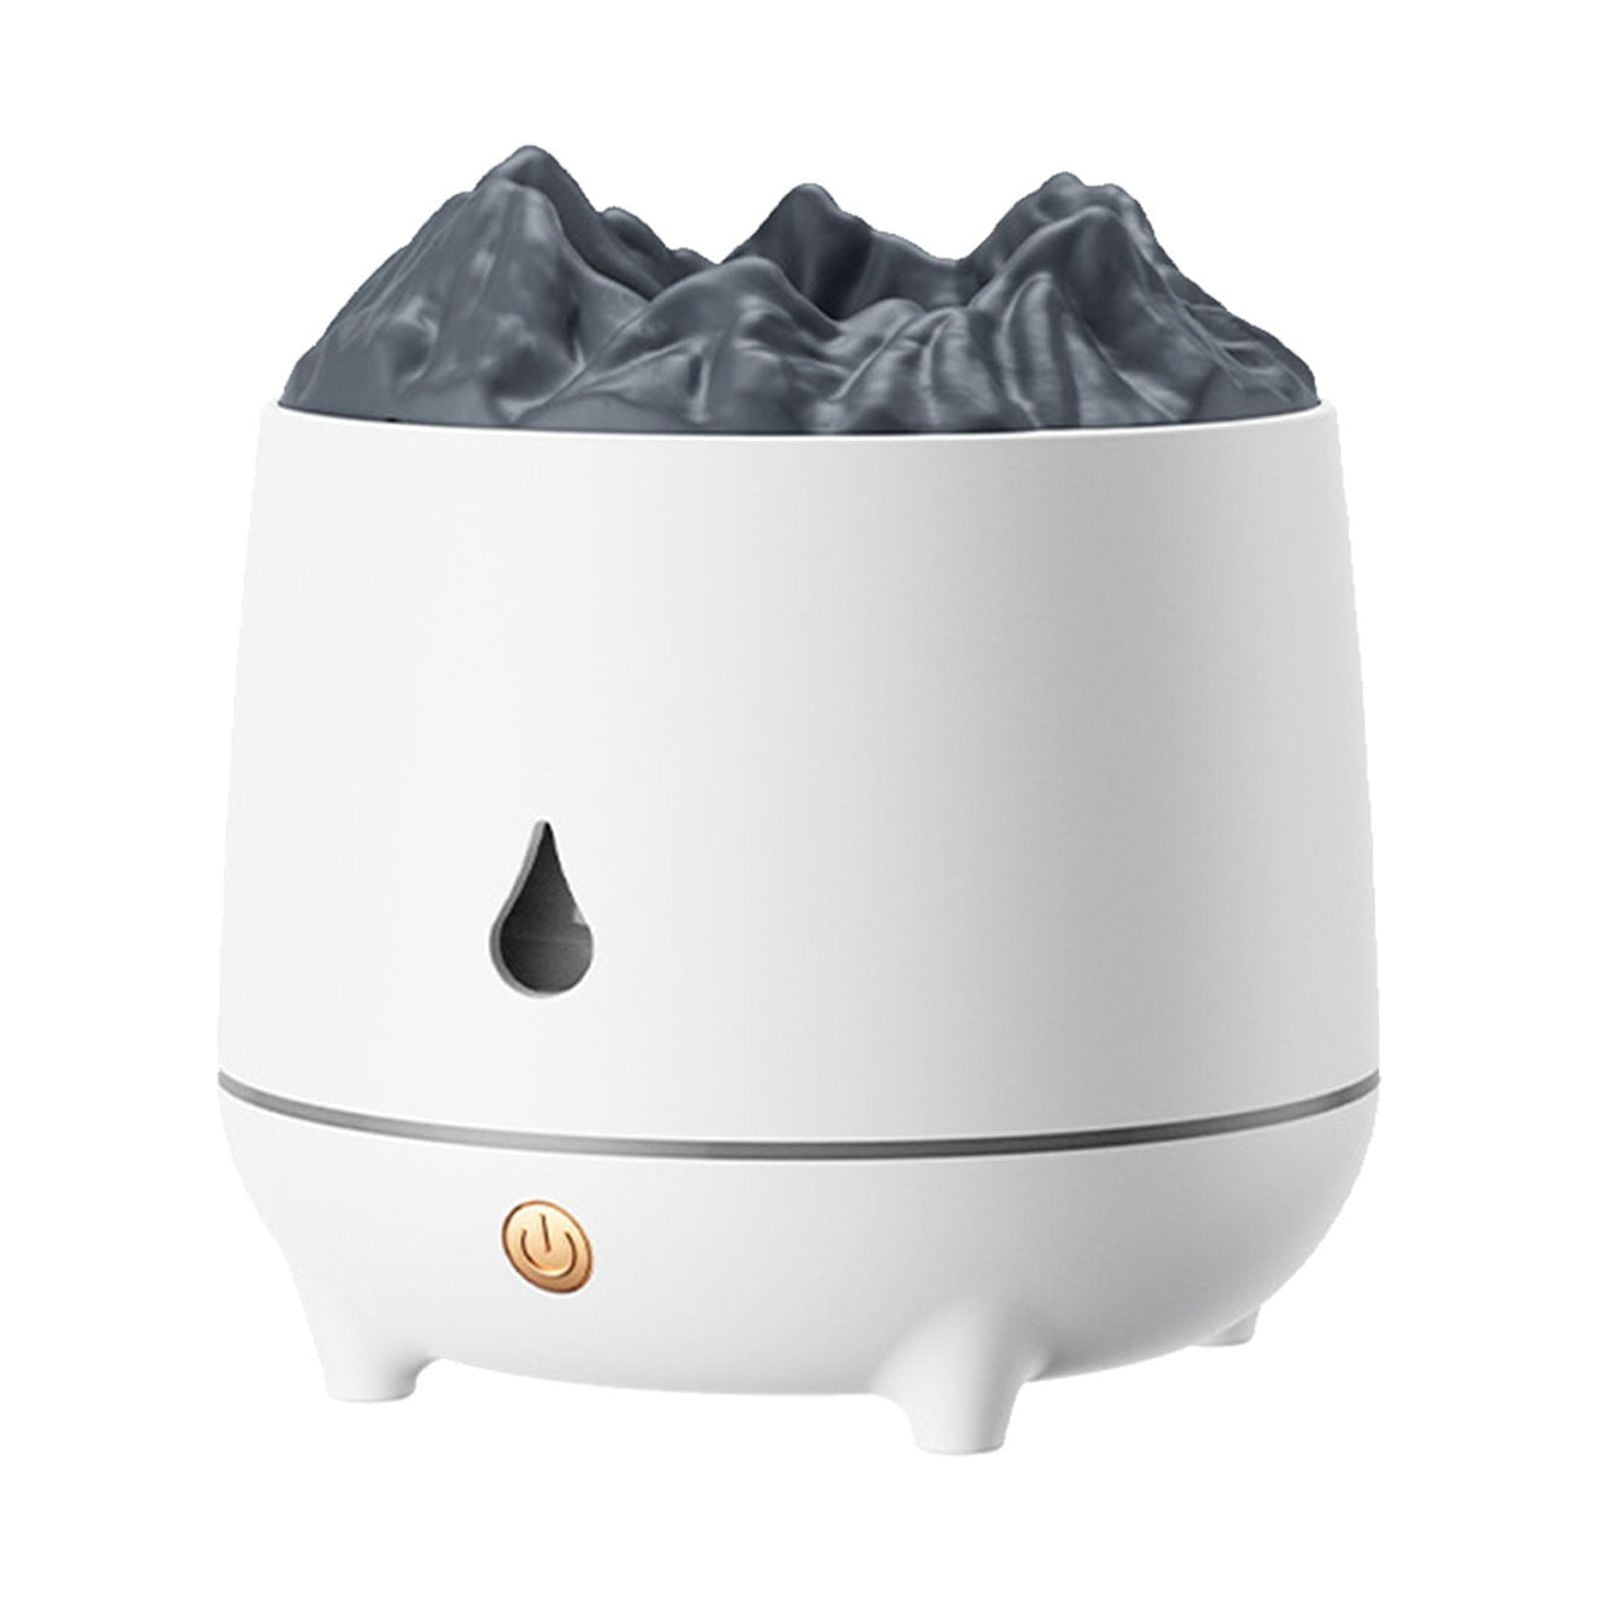 Volcano Diffuser Humidifier For Good Home